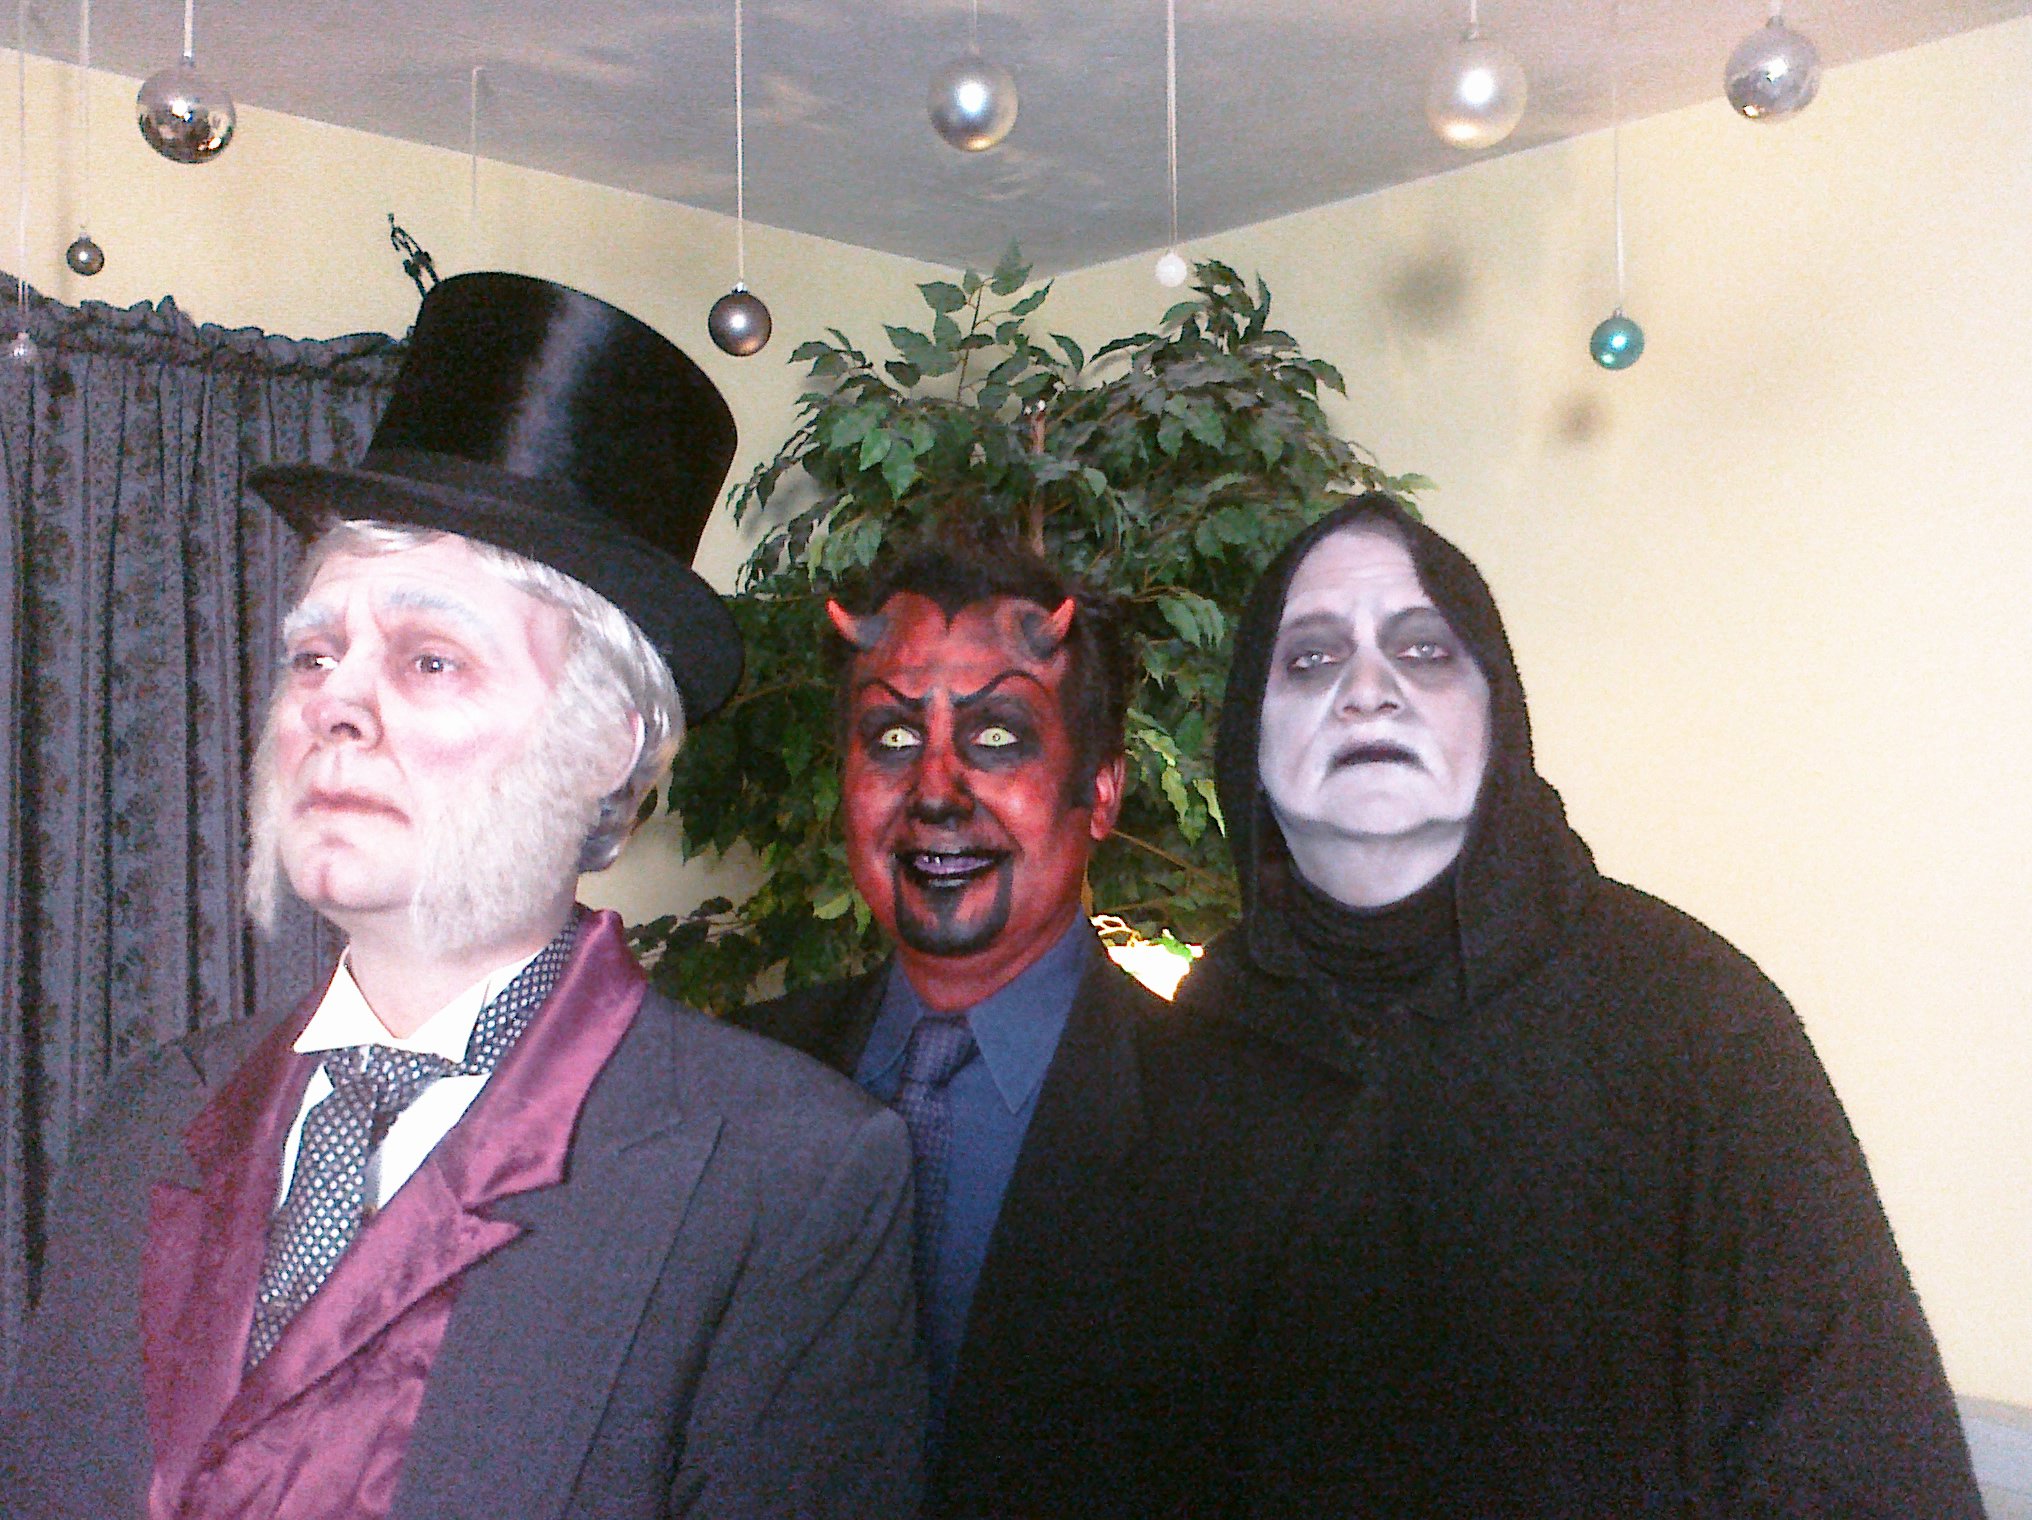 Ask Grim with Tom Konkle as Grim and Paul Hungerford as Demon Kevin and Dave Beeler and Scrooge